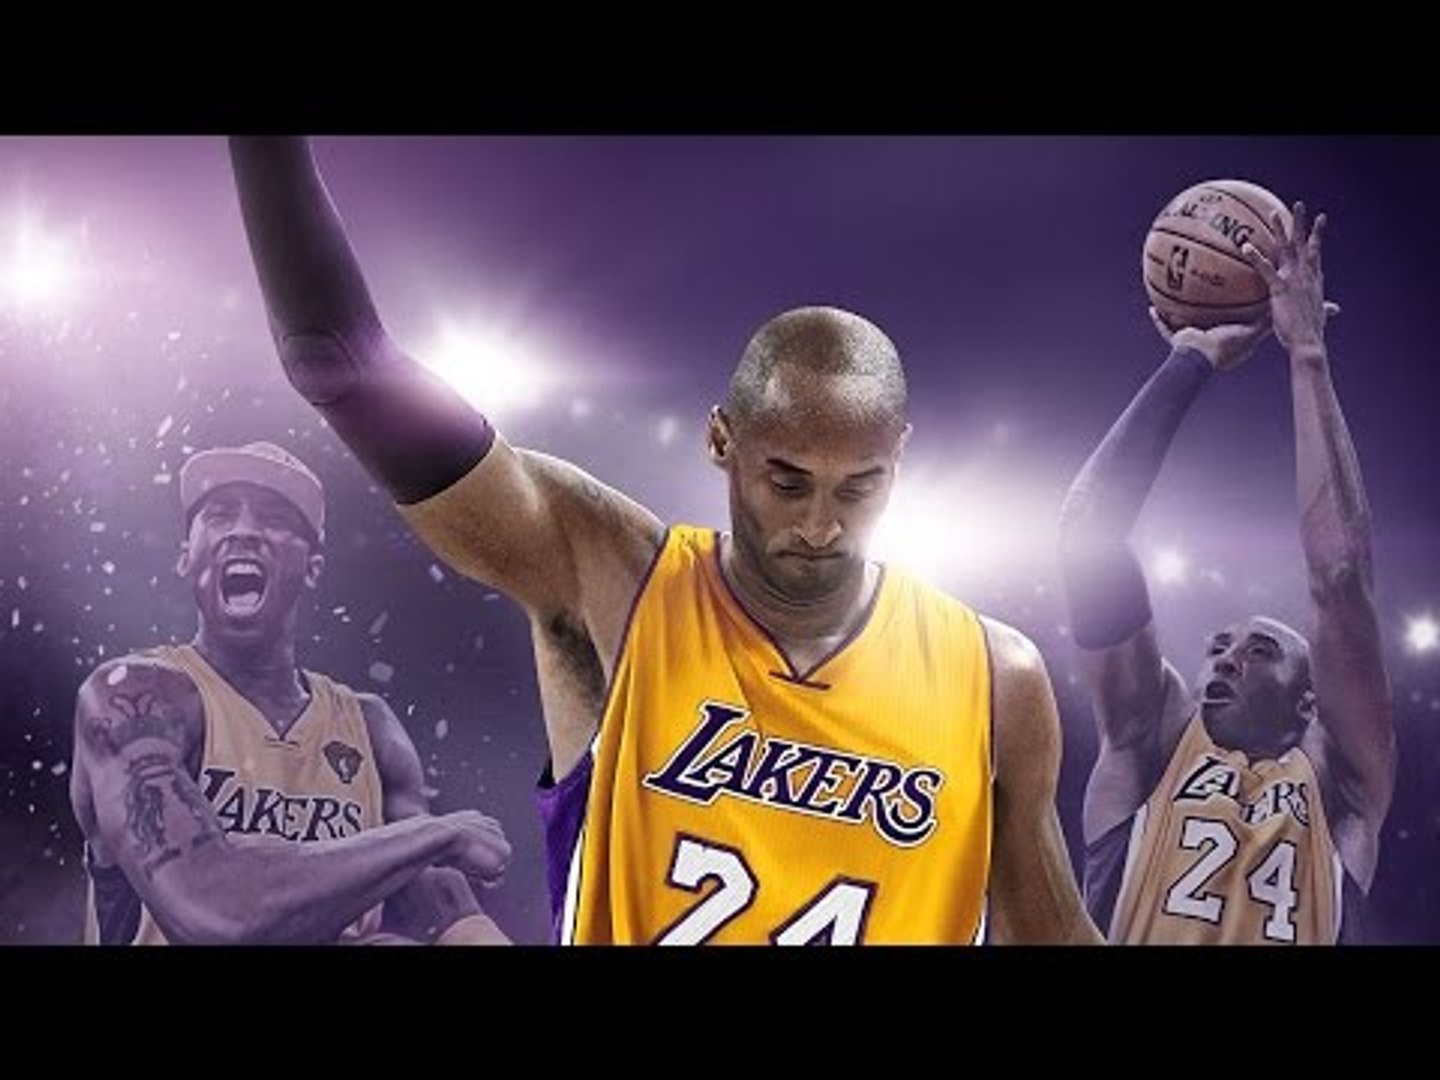 Kobe Bryant Intro and LD2K Interview! NBA 2K16 Road to the Finals Championship! - Dailymotion